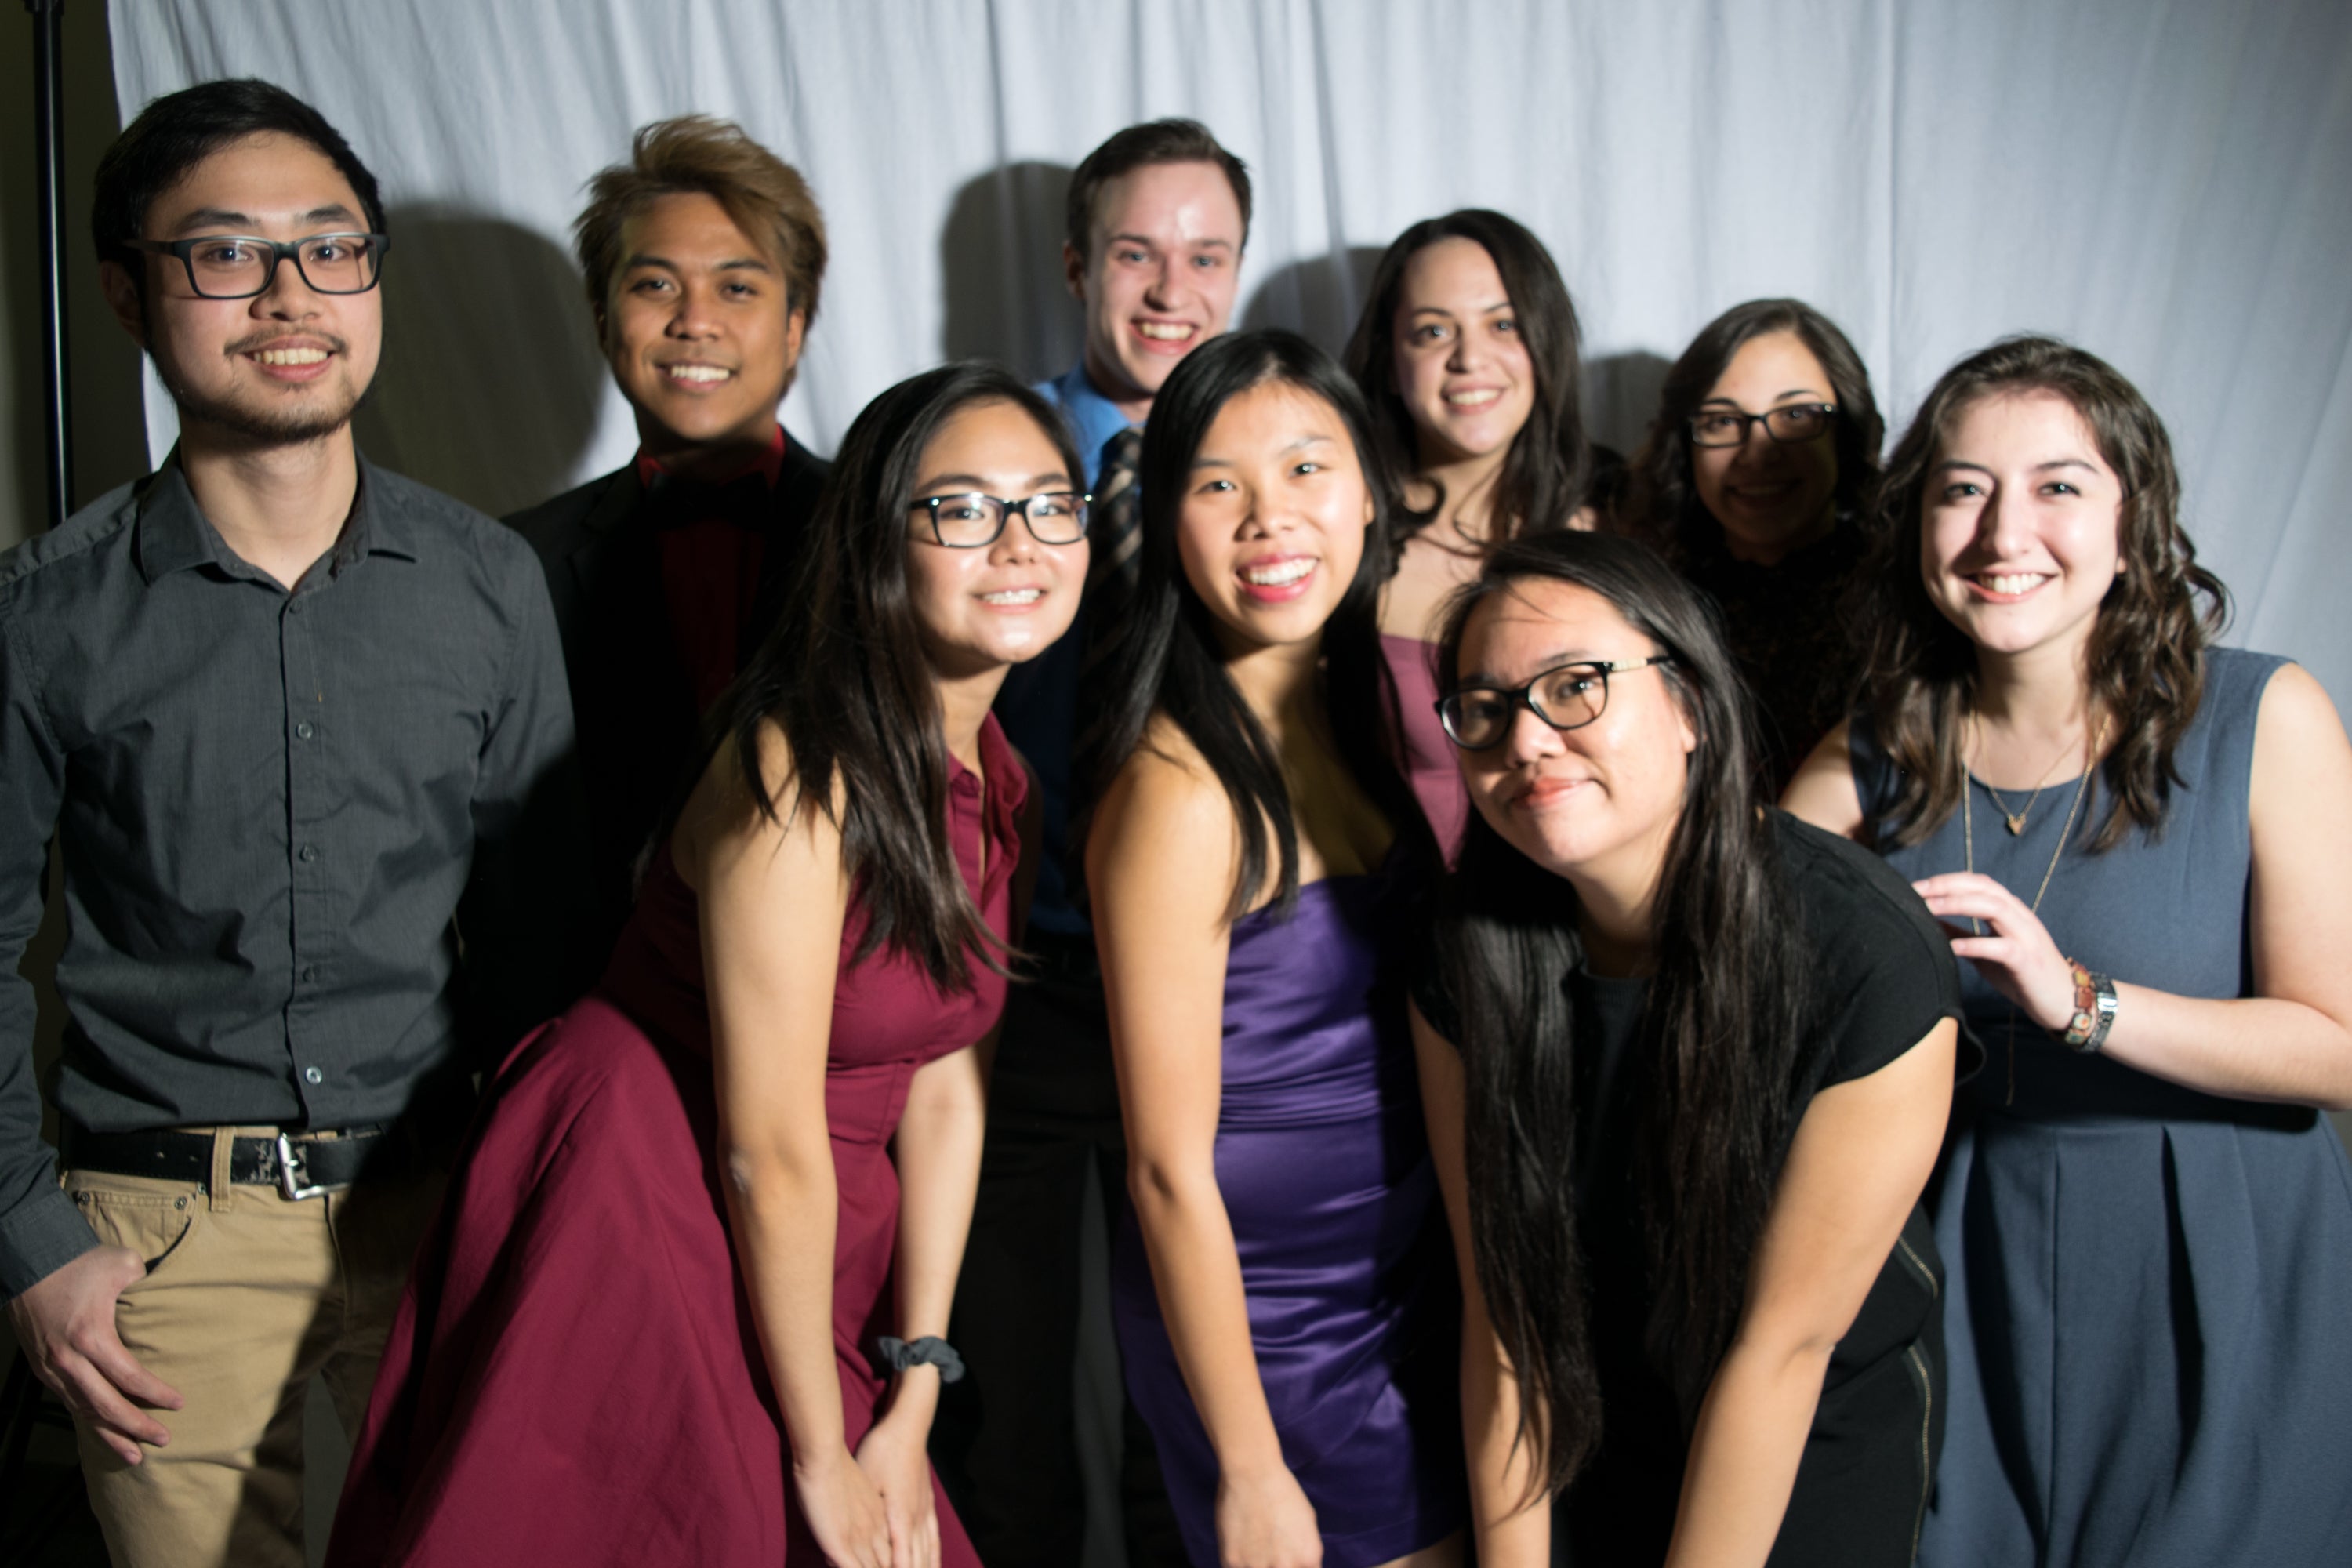 Students at the annual French Studies formal dinner and ball